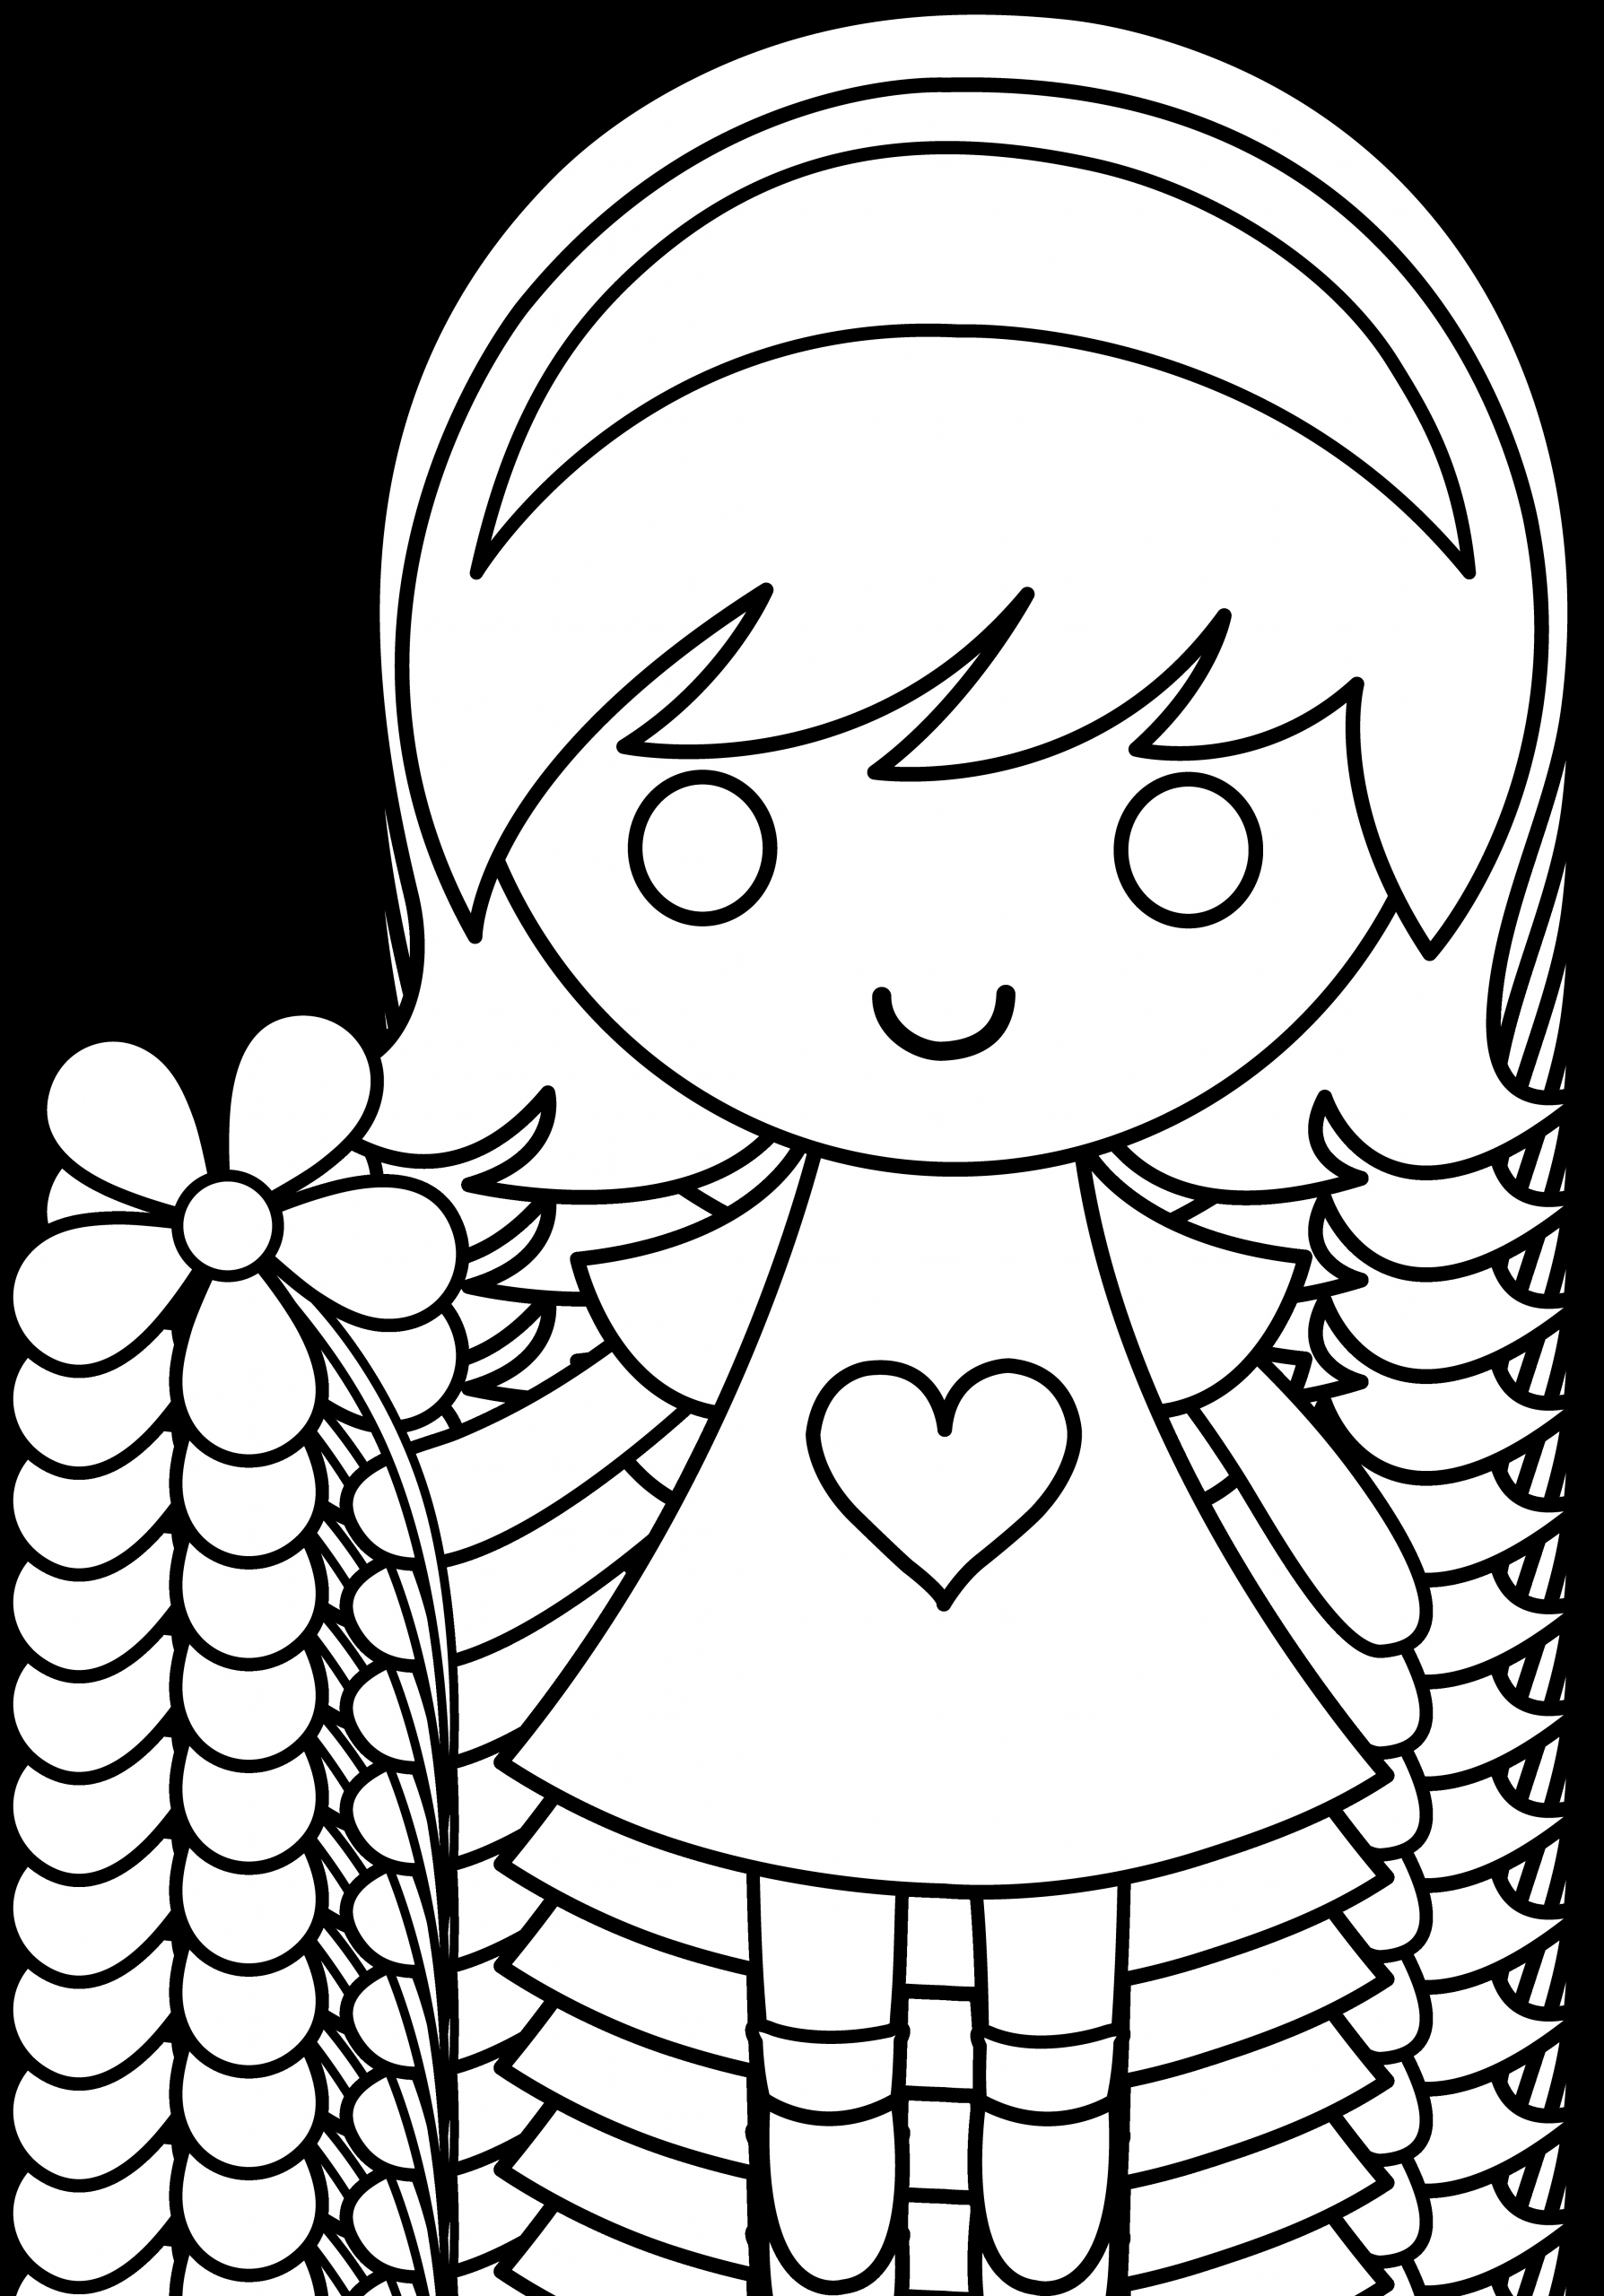 Coloring Pages Little Girls
 Daisy Girl Colorable Line Art Free Clip Art